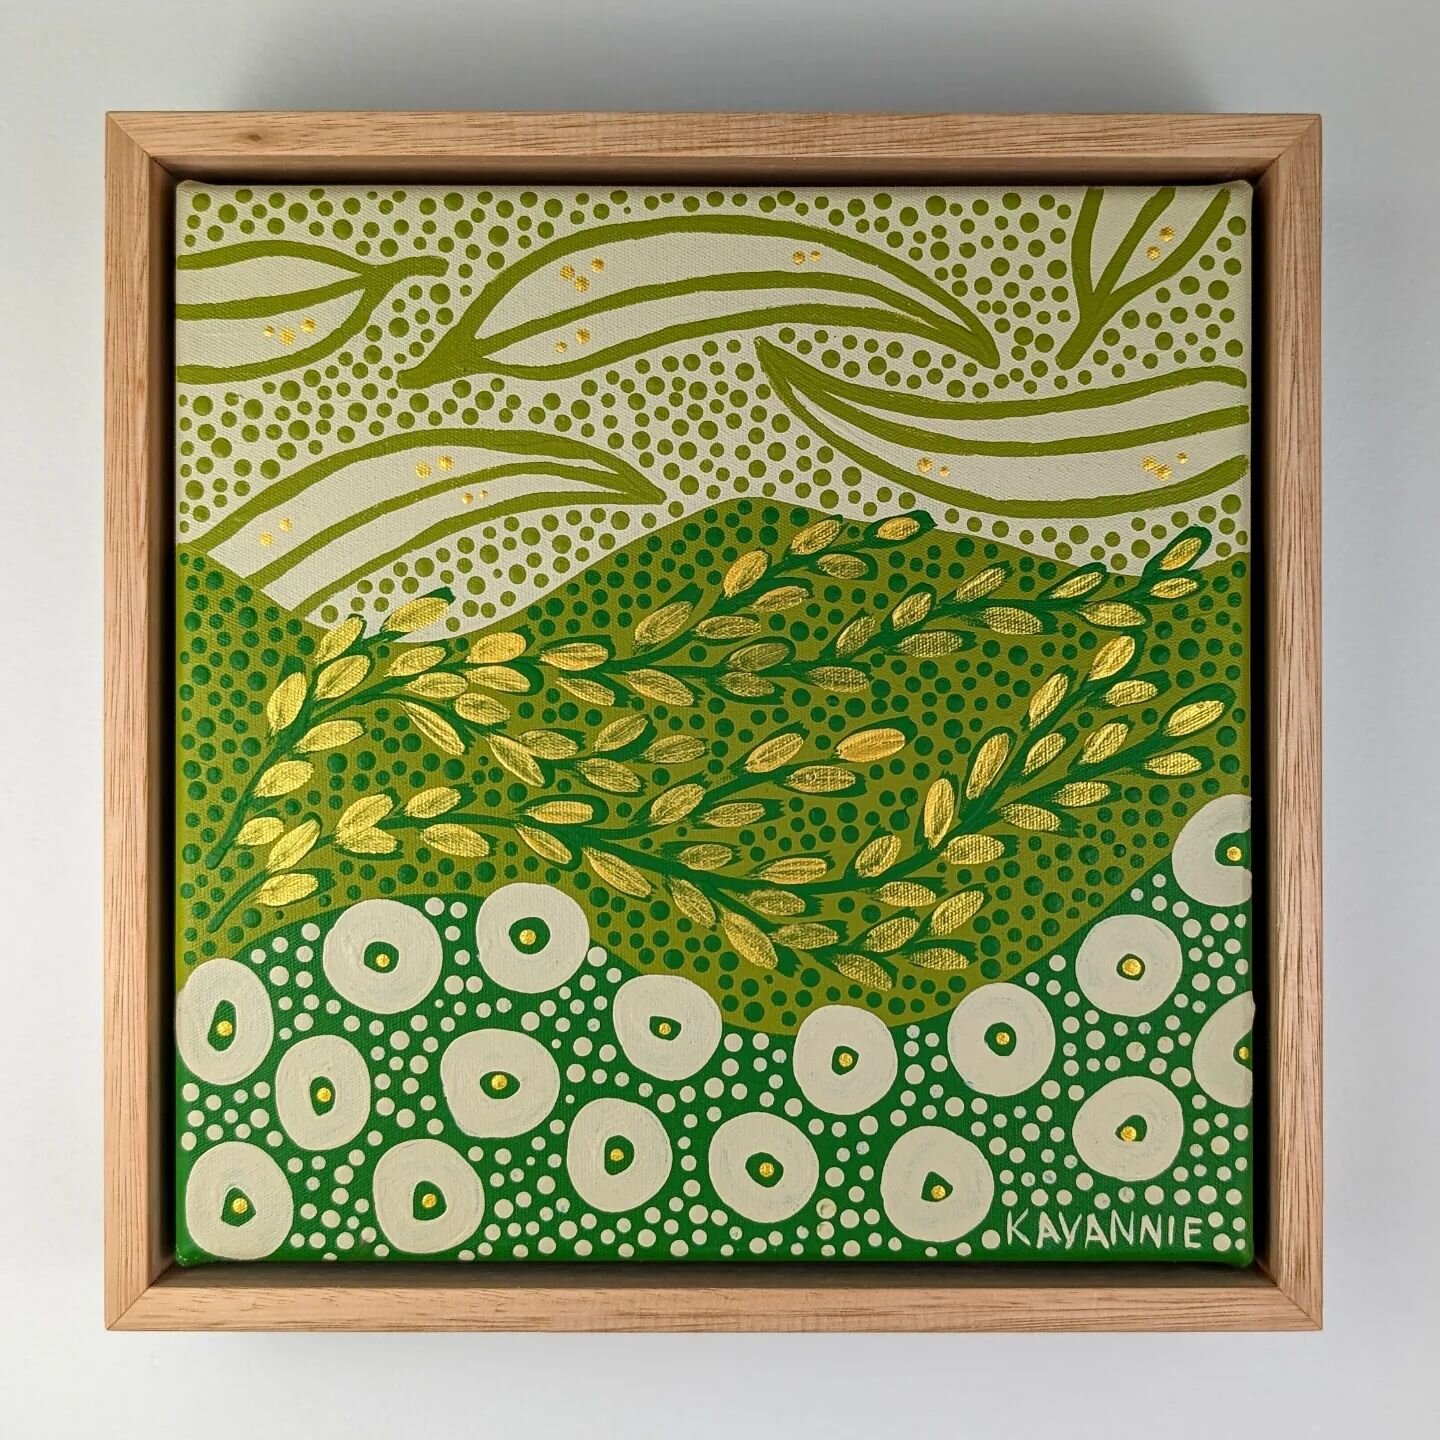 Six new green and gold minis are now available on @bluethumbart! Which is your favourite?

25 x 25 cm with a flooded gum float frame
$340 each

https://bluethumb.com.au/kayannie-denigan